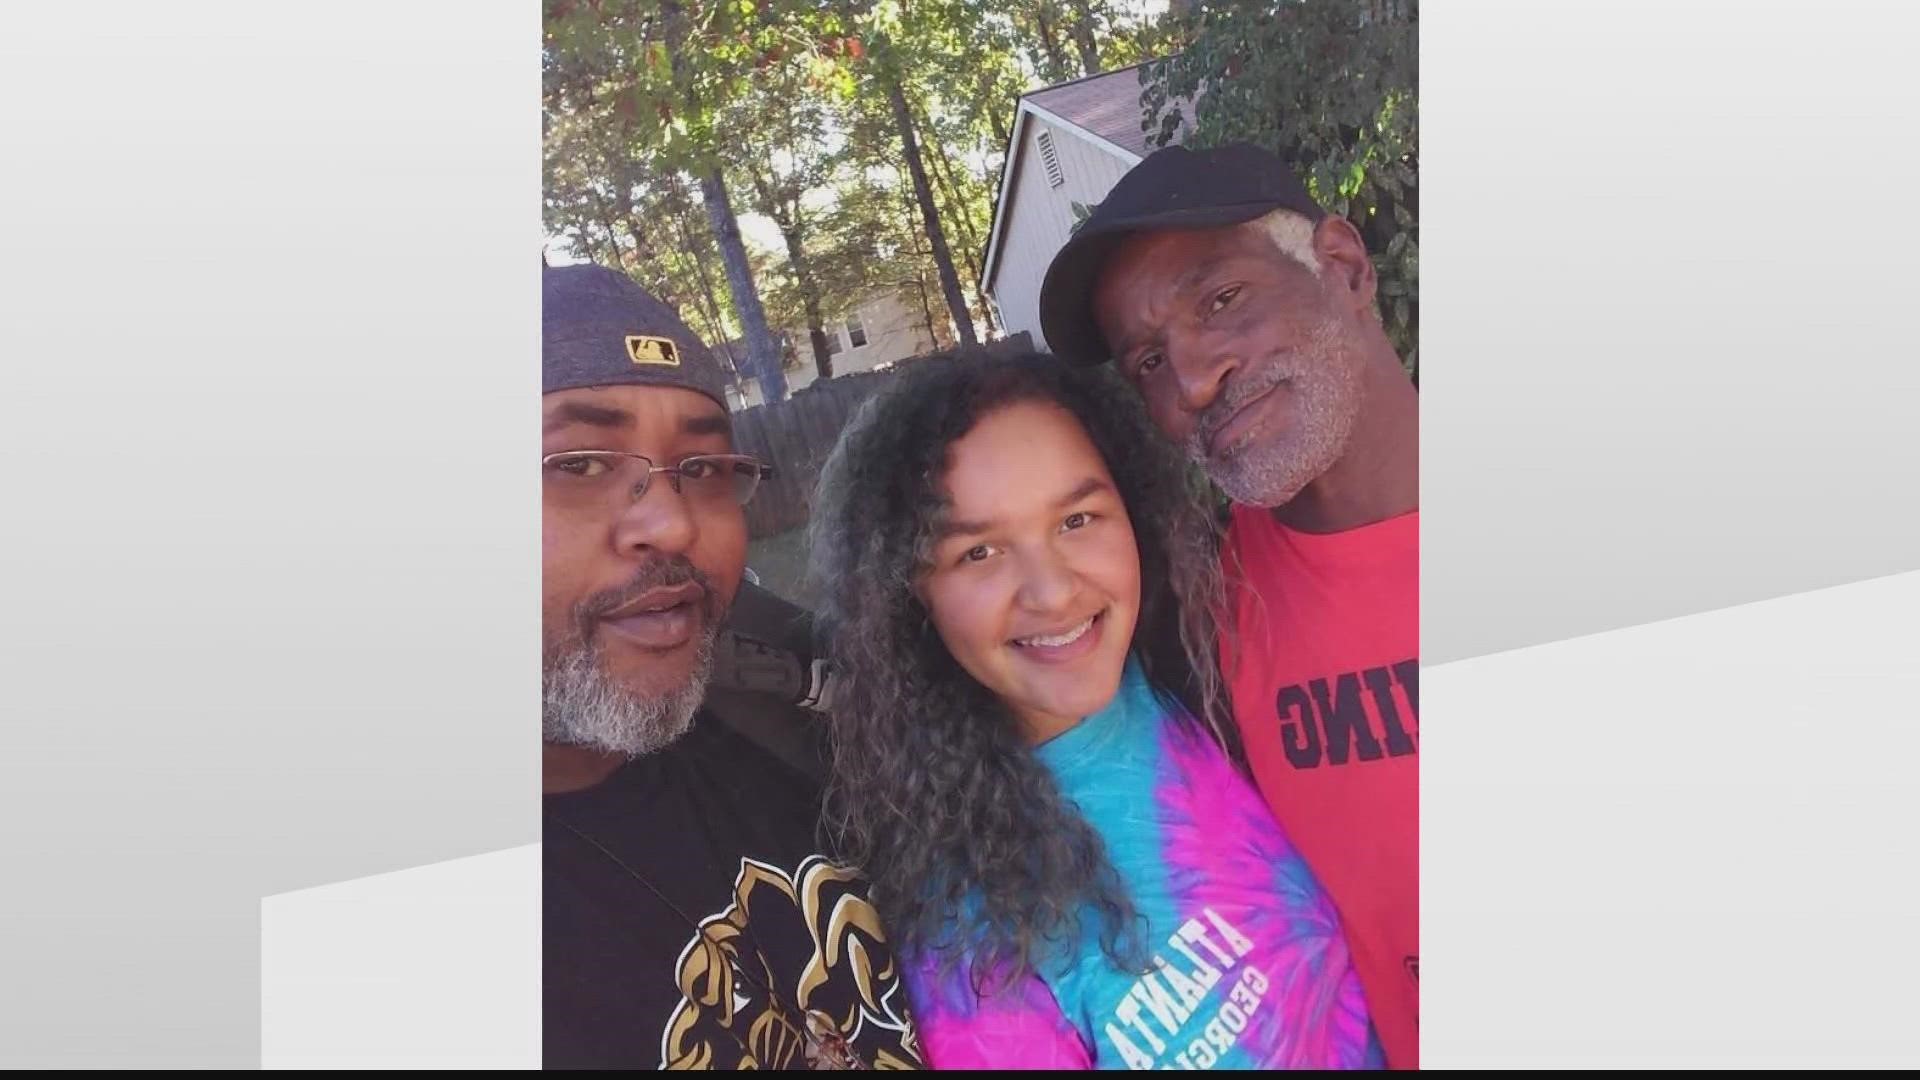 Ronald Hodge's son says his father was shot in the head after helping a woman who was in an argument with the shooter. He was a brother to 8 siblings.